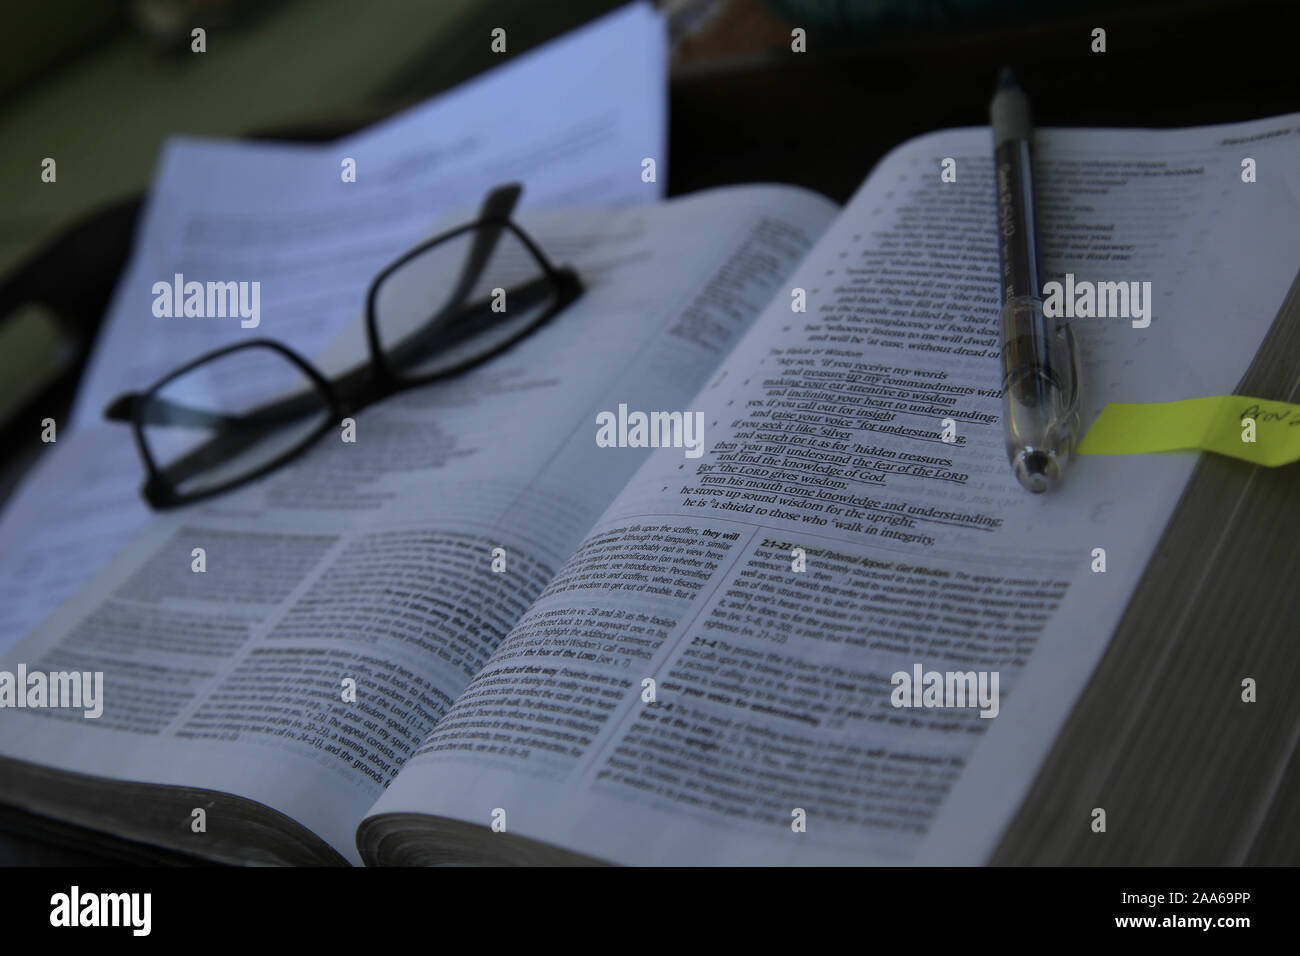 Bible opened to a verse during a bible study with reading glasses and a pen. Stock Photo